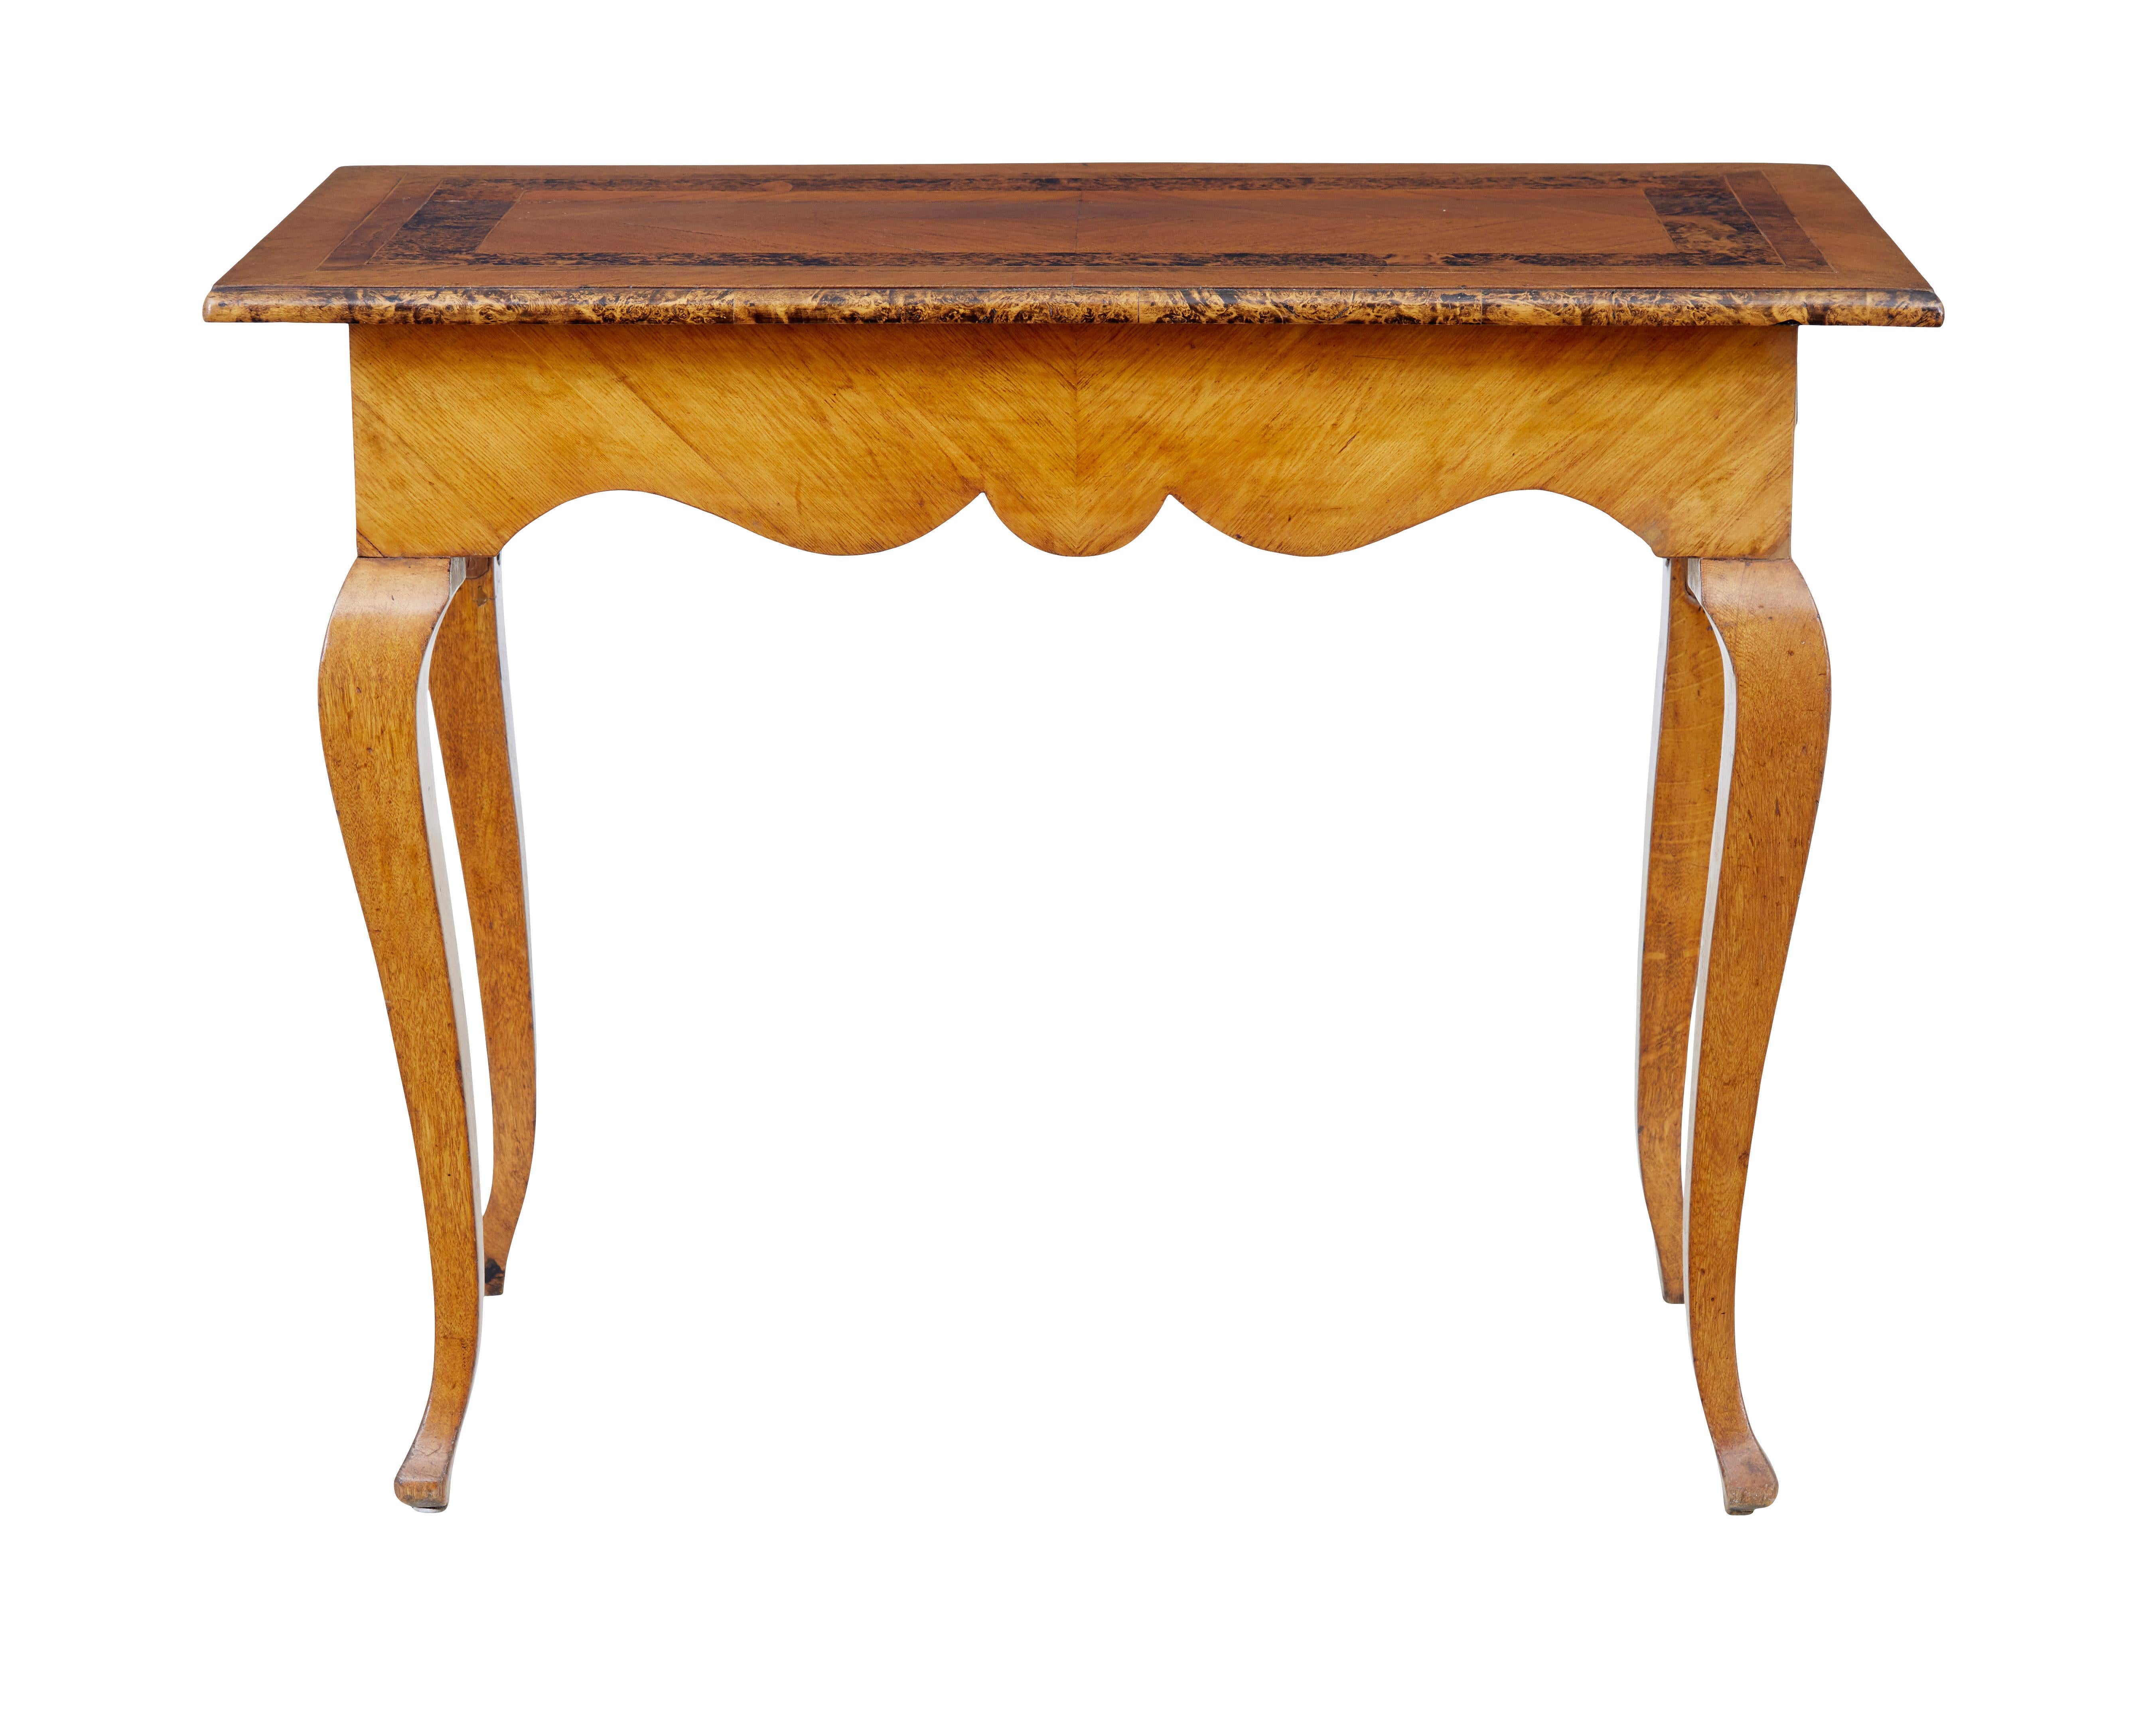 Birch Swedish Mid-19th Century Alder Root Occasional Table For Sale